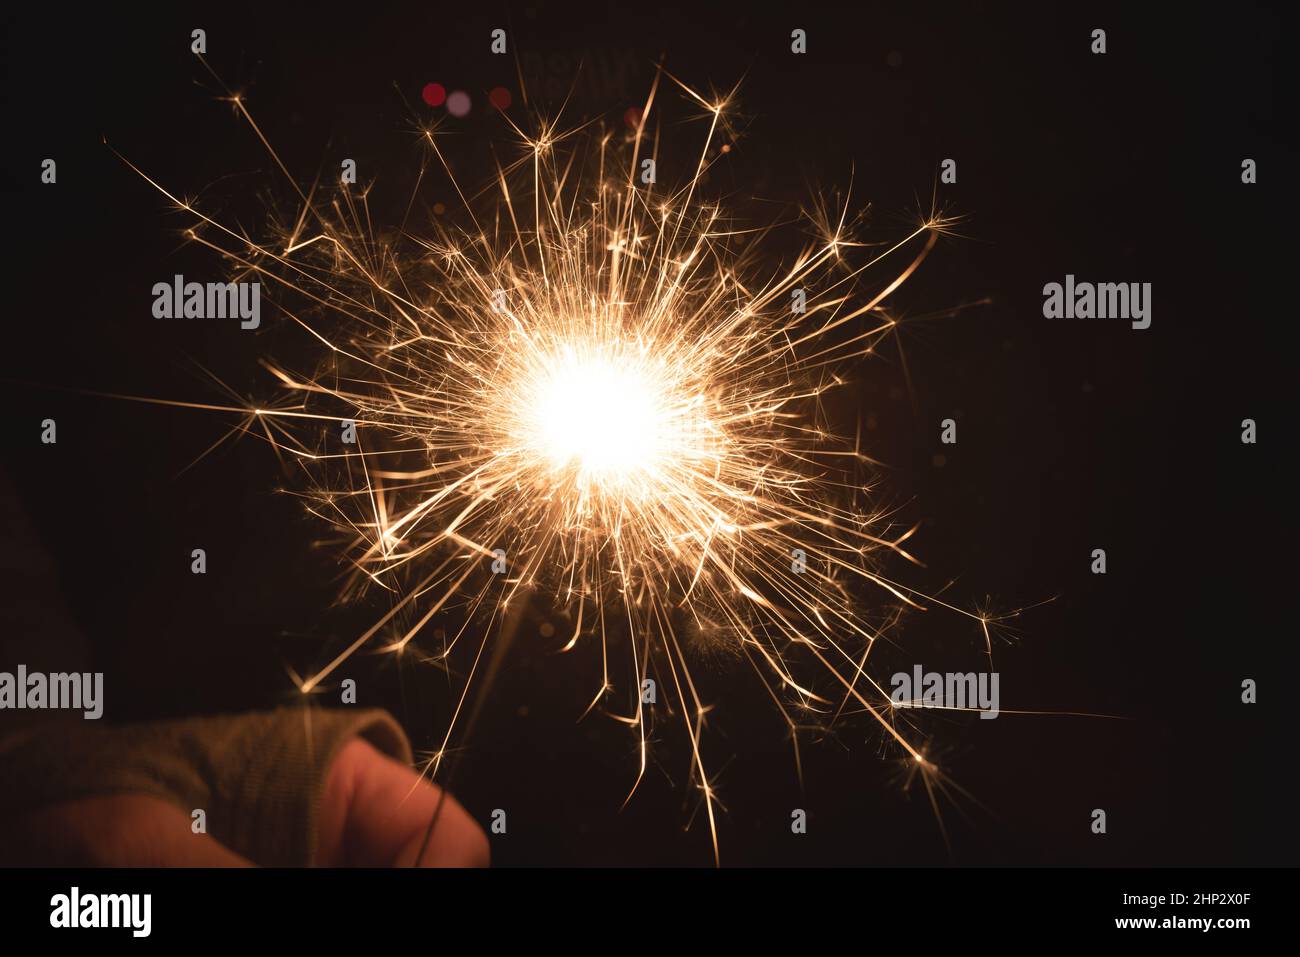 Burning sparkler at night. Hand holds a burning sparkler at night. Christmas background with colorful bokeh and space for text. Stock Photo